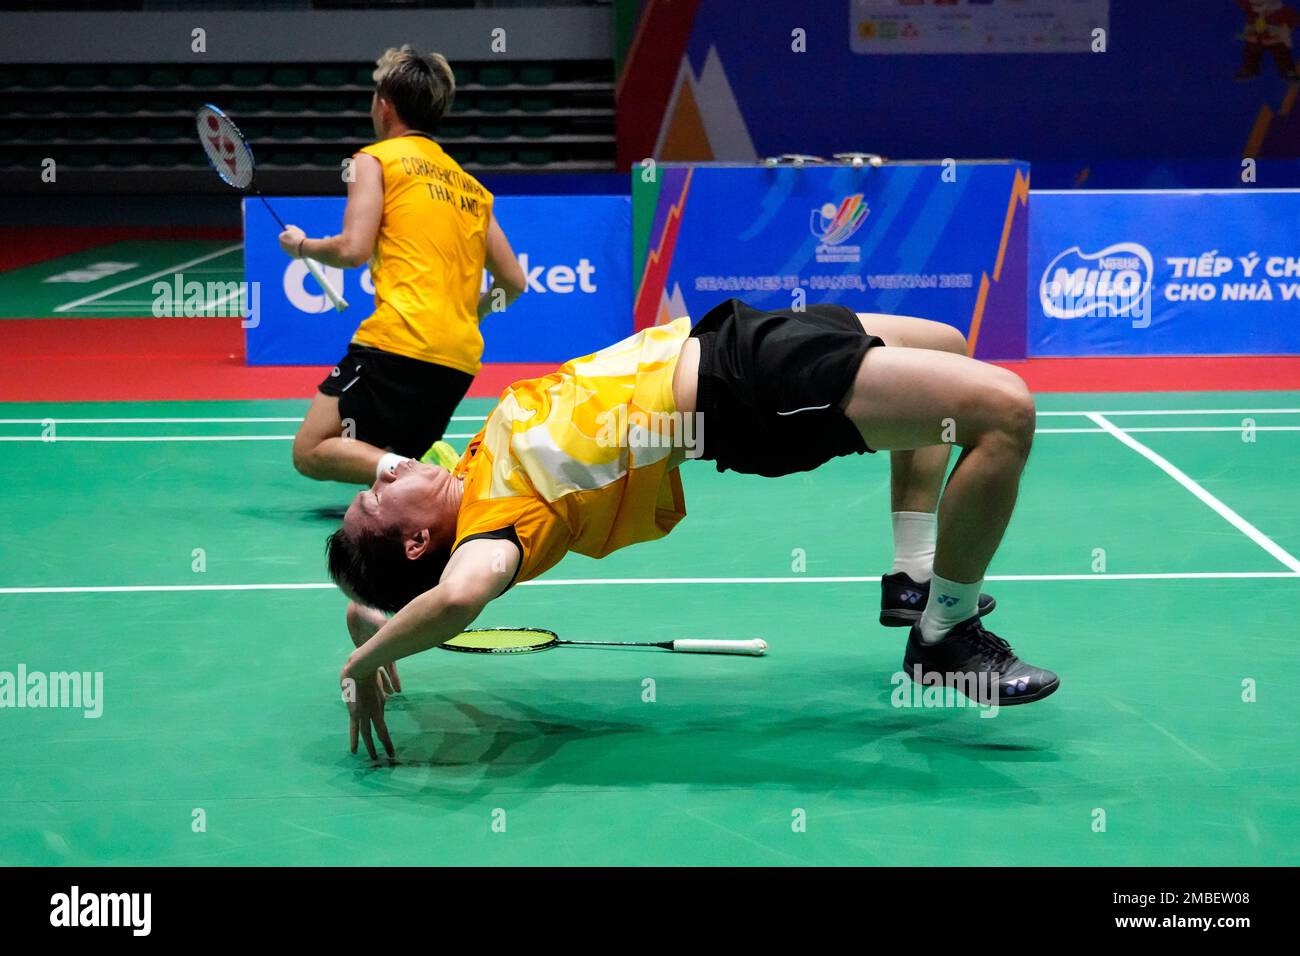 Thailands Chaloempon Charoenkitamorn, rear, and Nanthakam Yordphaisong, bottom, celebrate after defeating Malaysias Man Wei Chong and Tee Kai Wun during their mens team badminton final match at the 31st Southeast Asian Games (